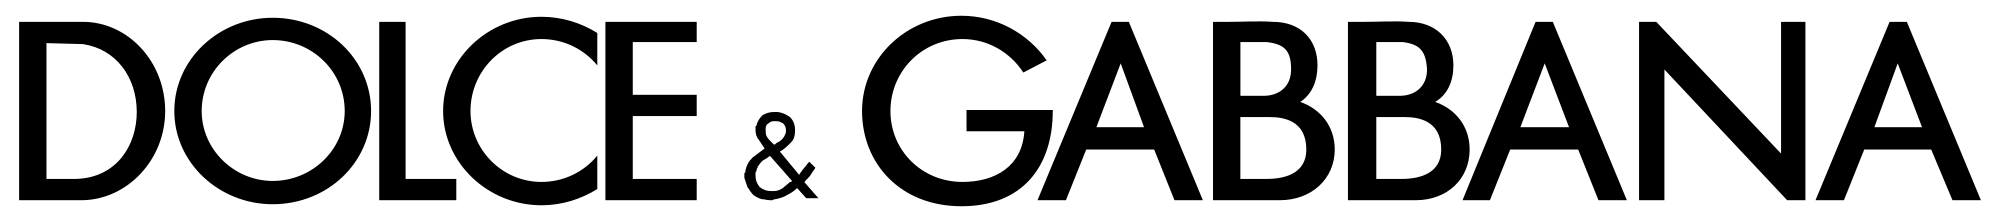 Dolce and Gabanna Logo - File:Dolce and Gabbana.svg - Wikimedia Commons